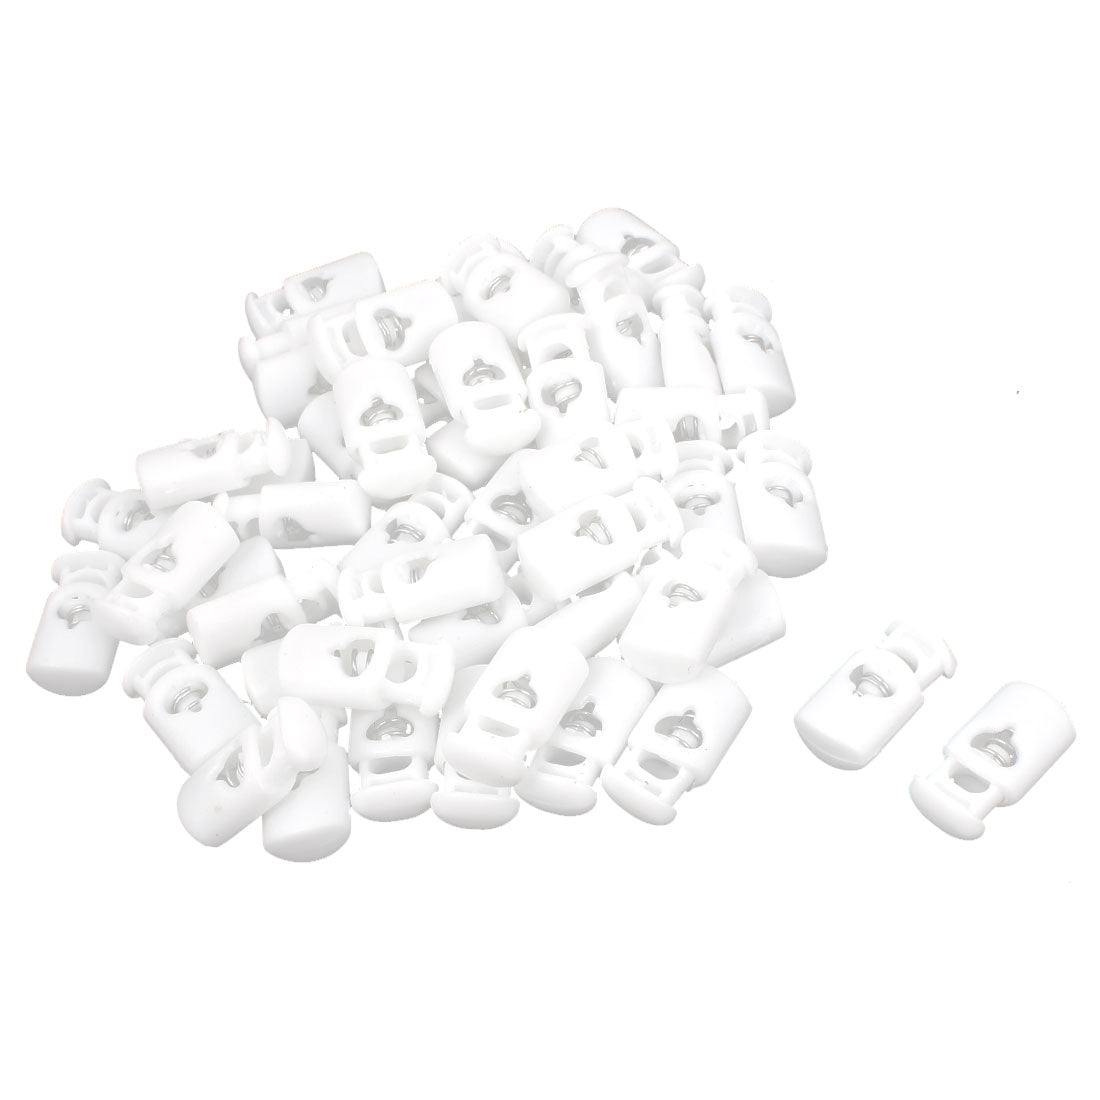 uxcell Uxcell White Plastic Single Hole 5mm Dia Cylindrical Shape Spring Loaded Clamps Clip Tent Drawstring Cord Locks Stopper Toggles Fastener 50pcs